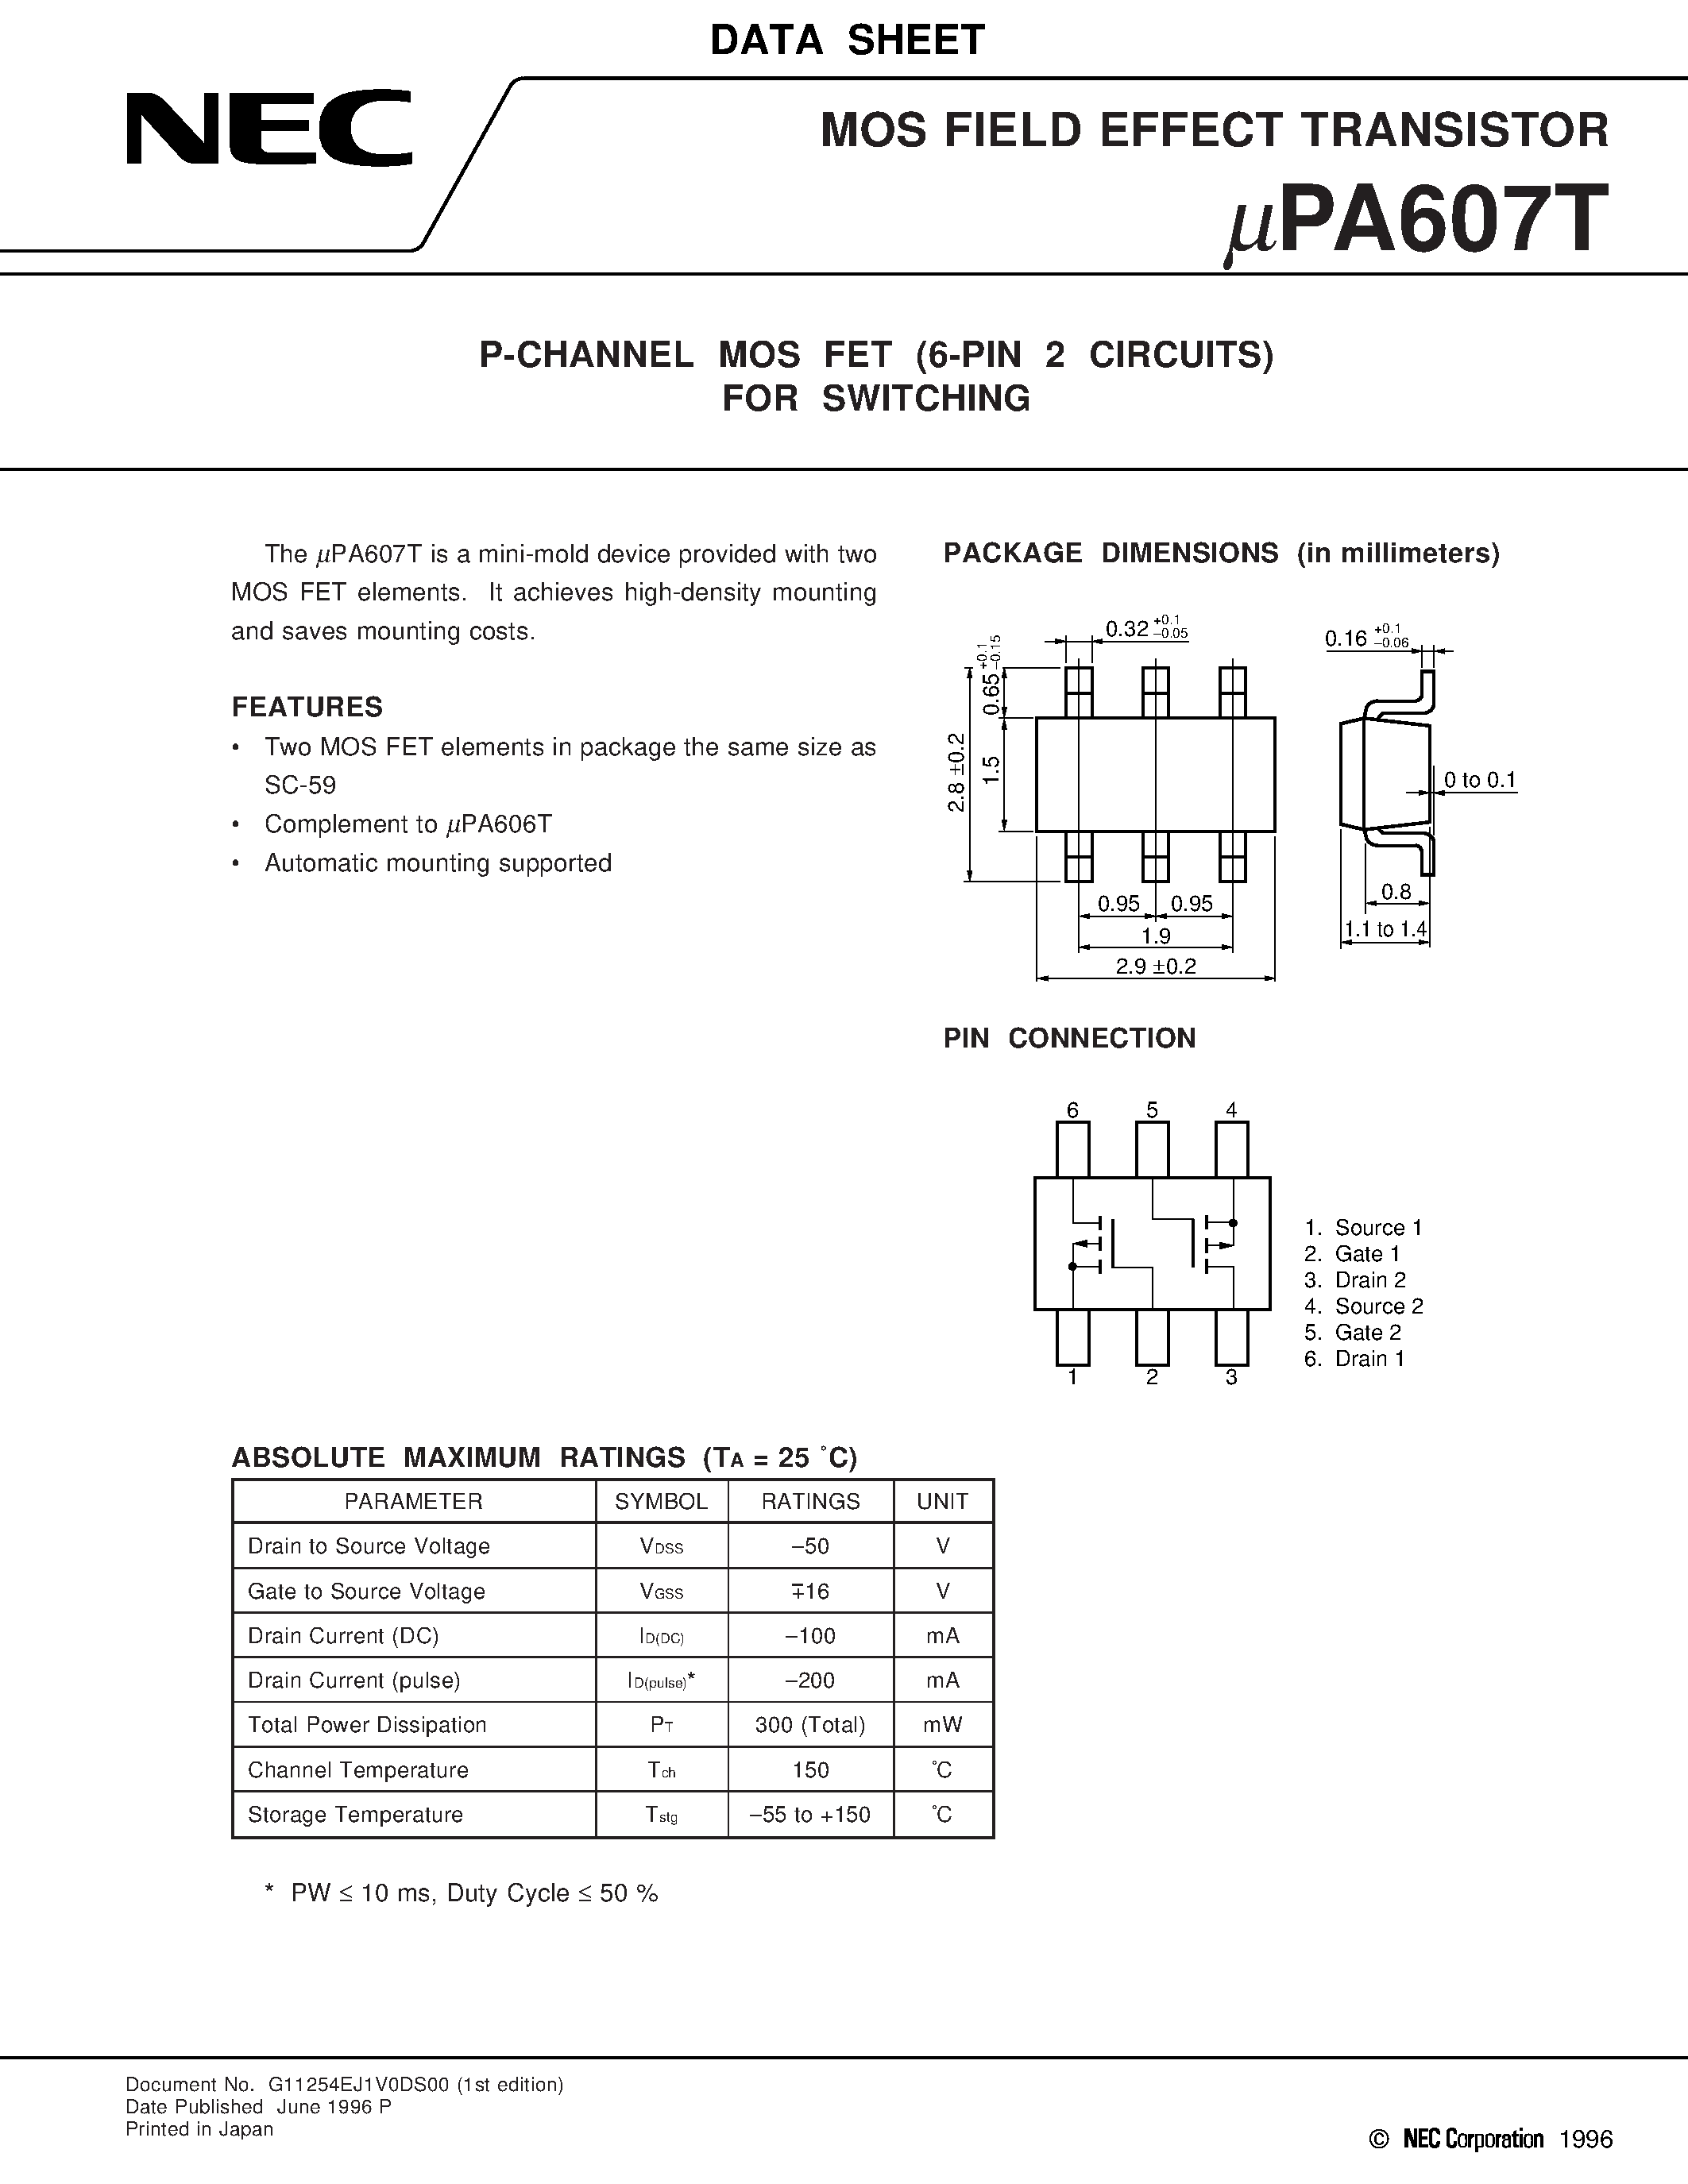 Даташит UPA607T - P-CHANNEL MOS FET 6-PIN 2 CIRCUITS FOR SWITCHING страница 1